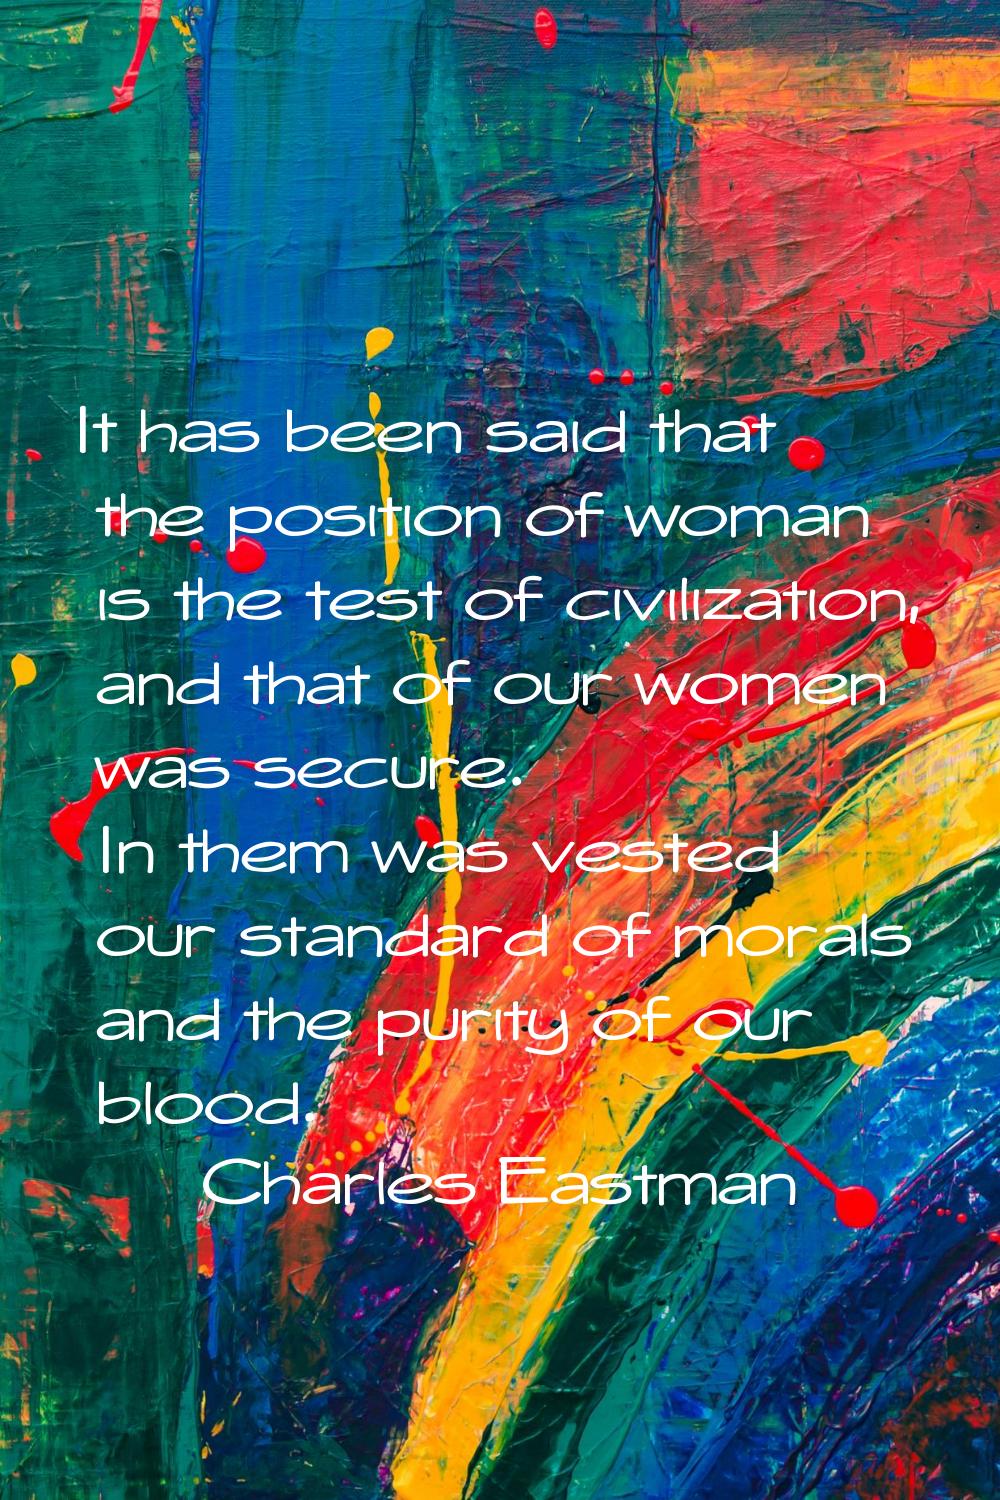 It has been said that the position of woman is the test of civilization, and that of our women was 